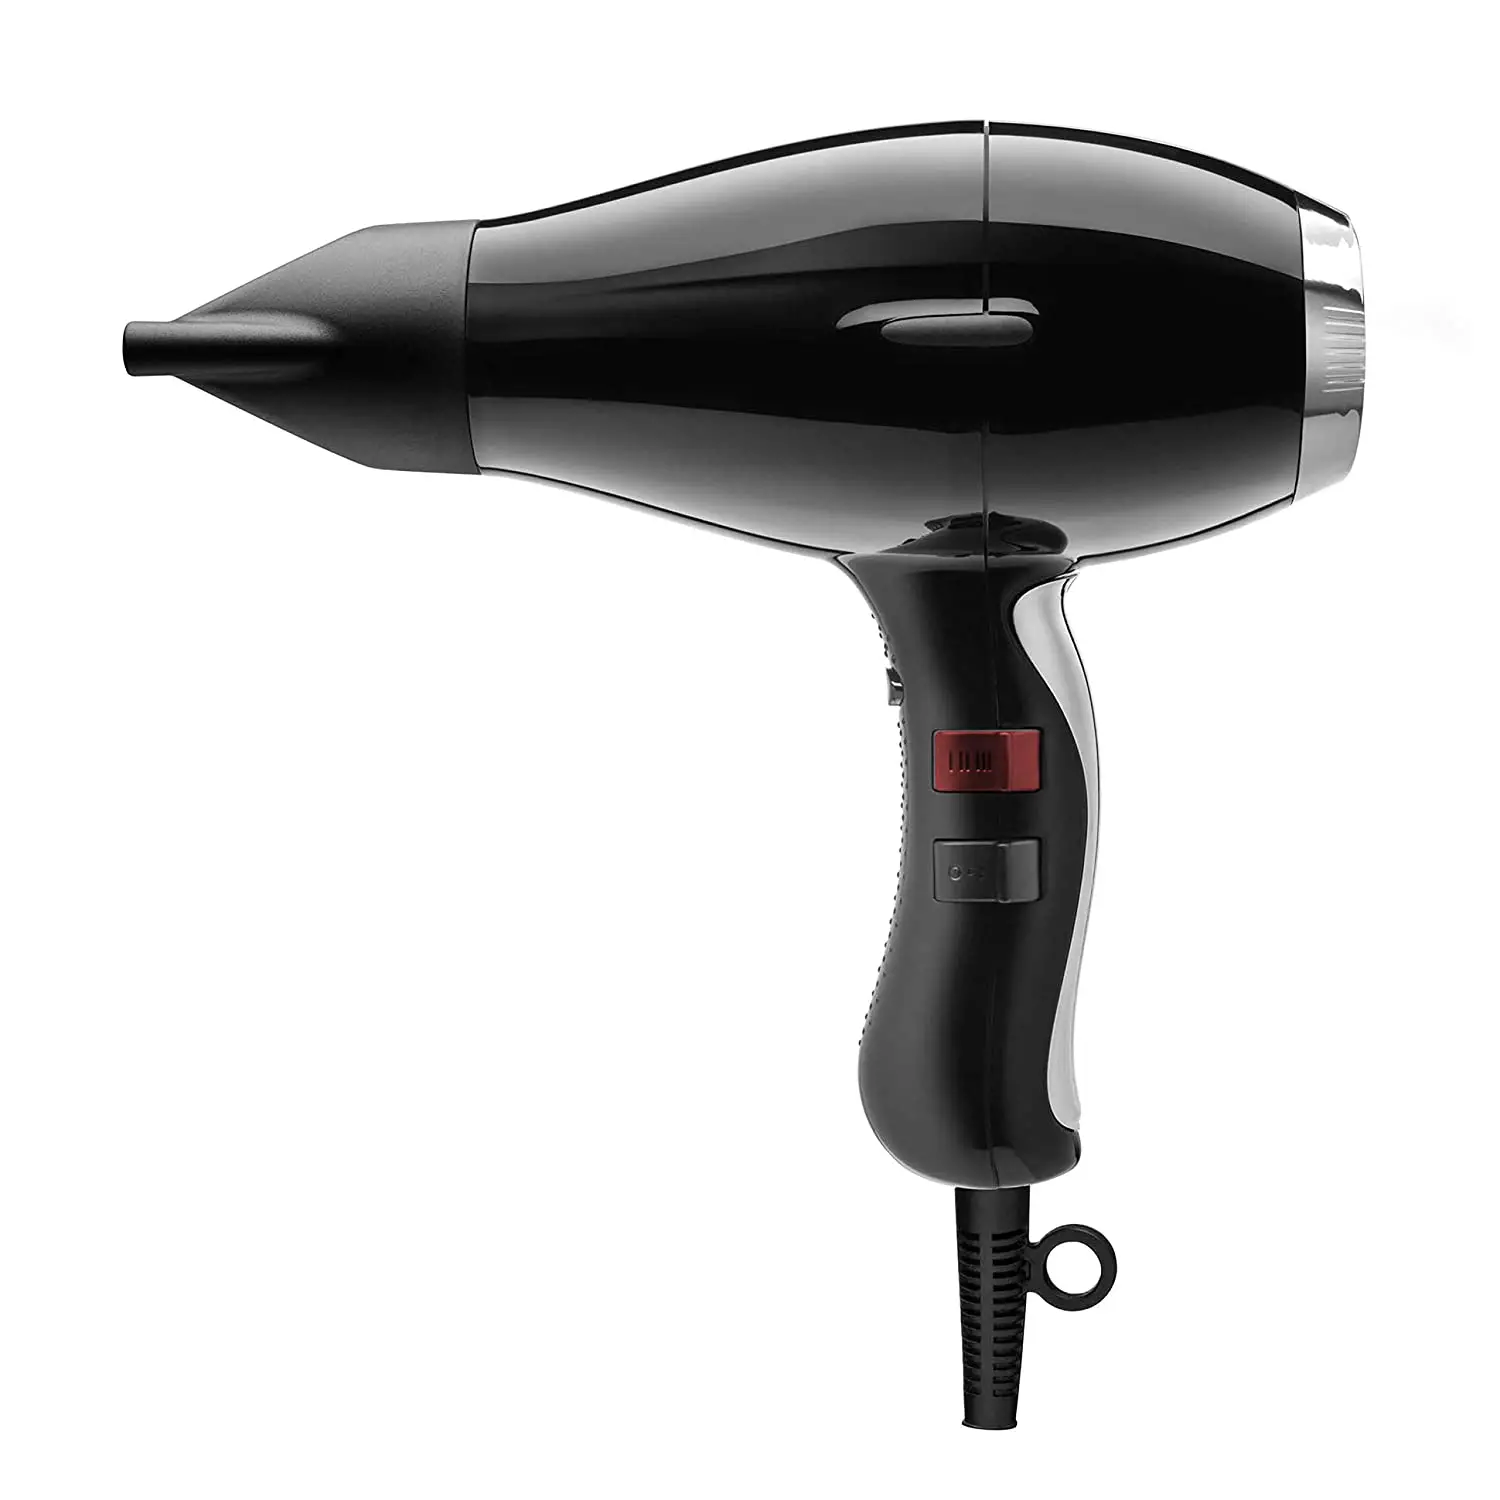 Elchim 3900 Healthy Ionic Hair Dryer- Professional Ceramic and Ionic Blow Dryer - 2 Concentrators Included, Fast Drying, Quiet, and Lightweight